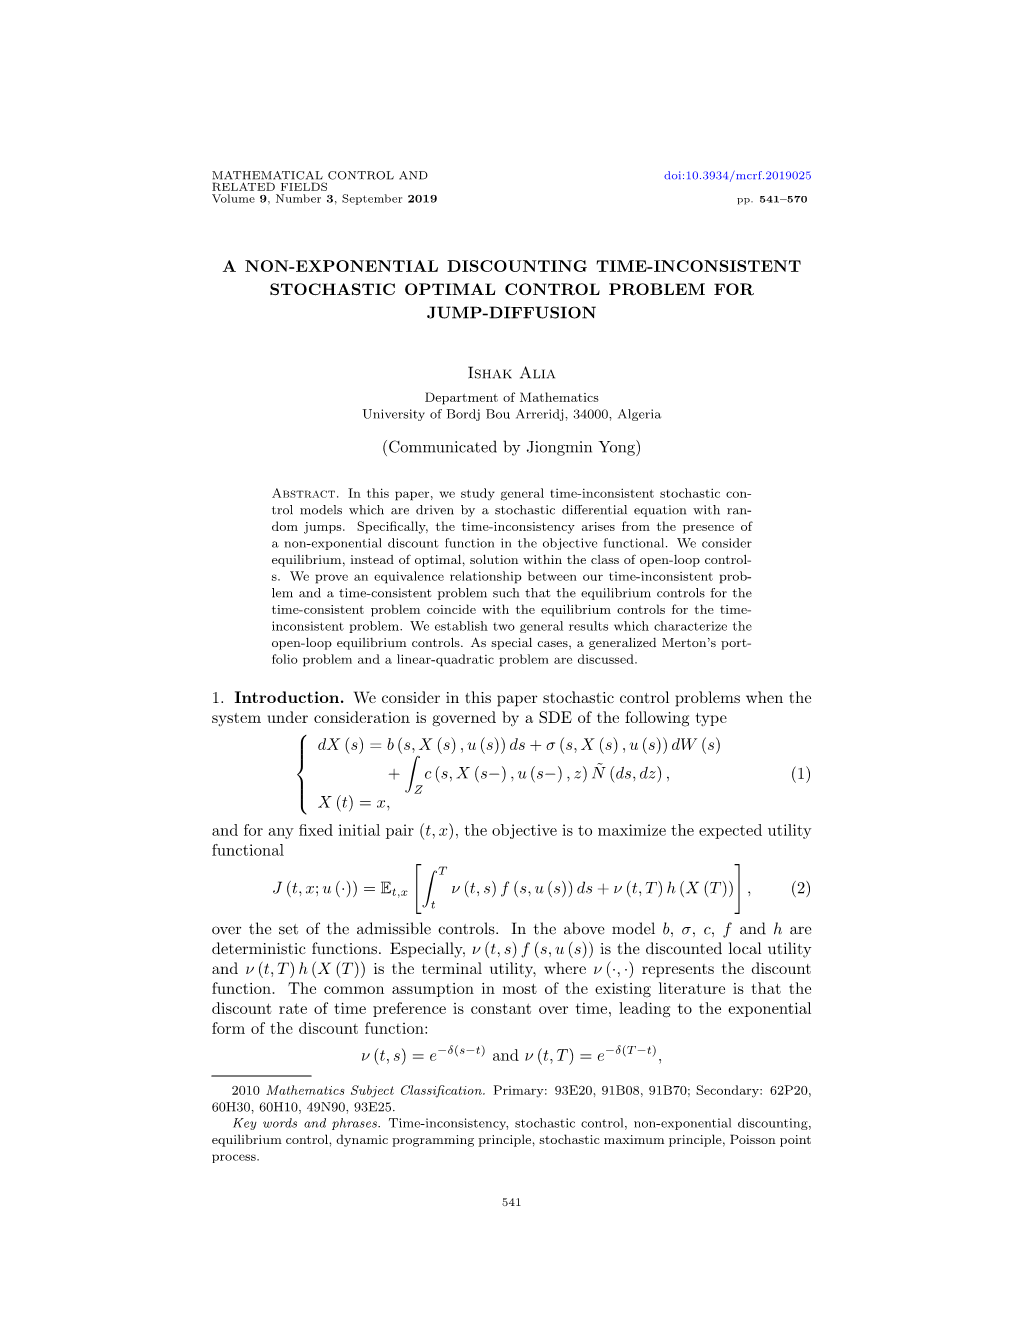 A NON-EXPONENTIAL DISCOUNTING TIME-INCONSISTENT STOCHASTIC OPTIMAL CONTROL PROBLEM for JUMP-DIFFUSION Ishak Alia (Communicated B